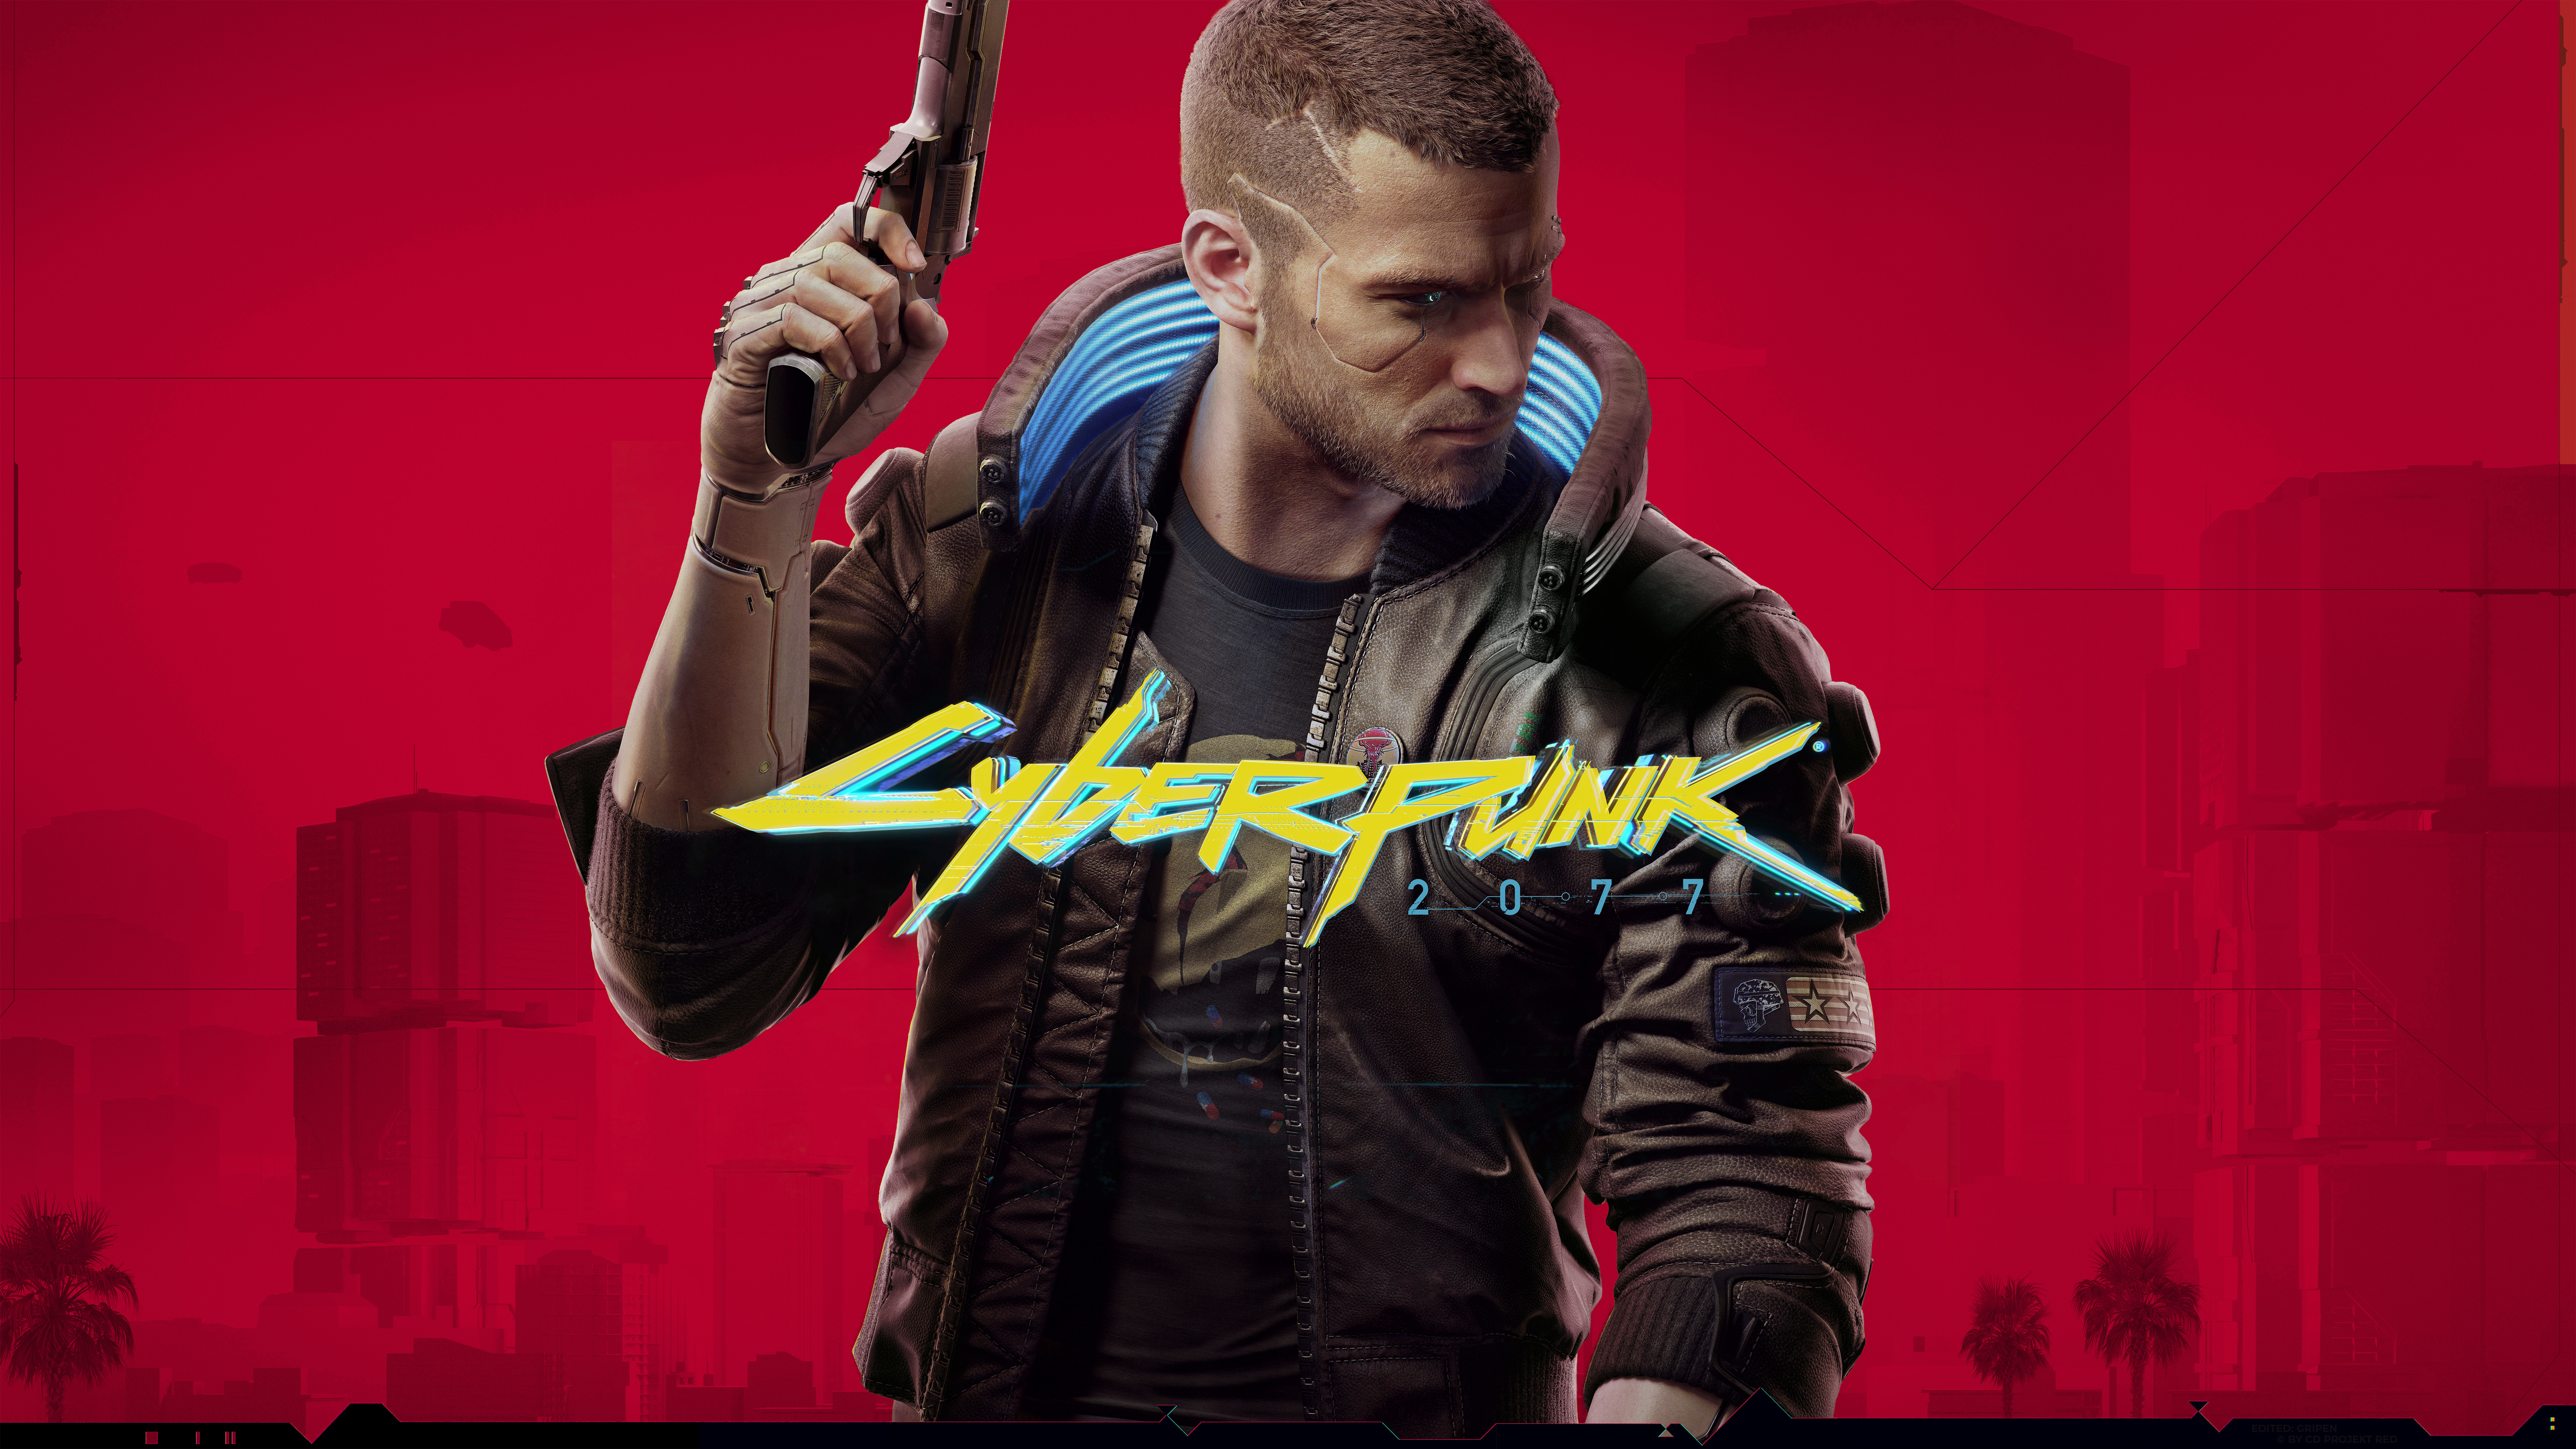 General 7111x4000 Cyberpunk 2077 CD Projekt RED video game art video games V (Cyberpunk 2077) PC gaming video game men video game characters weapon red background gun logo